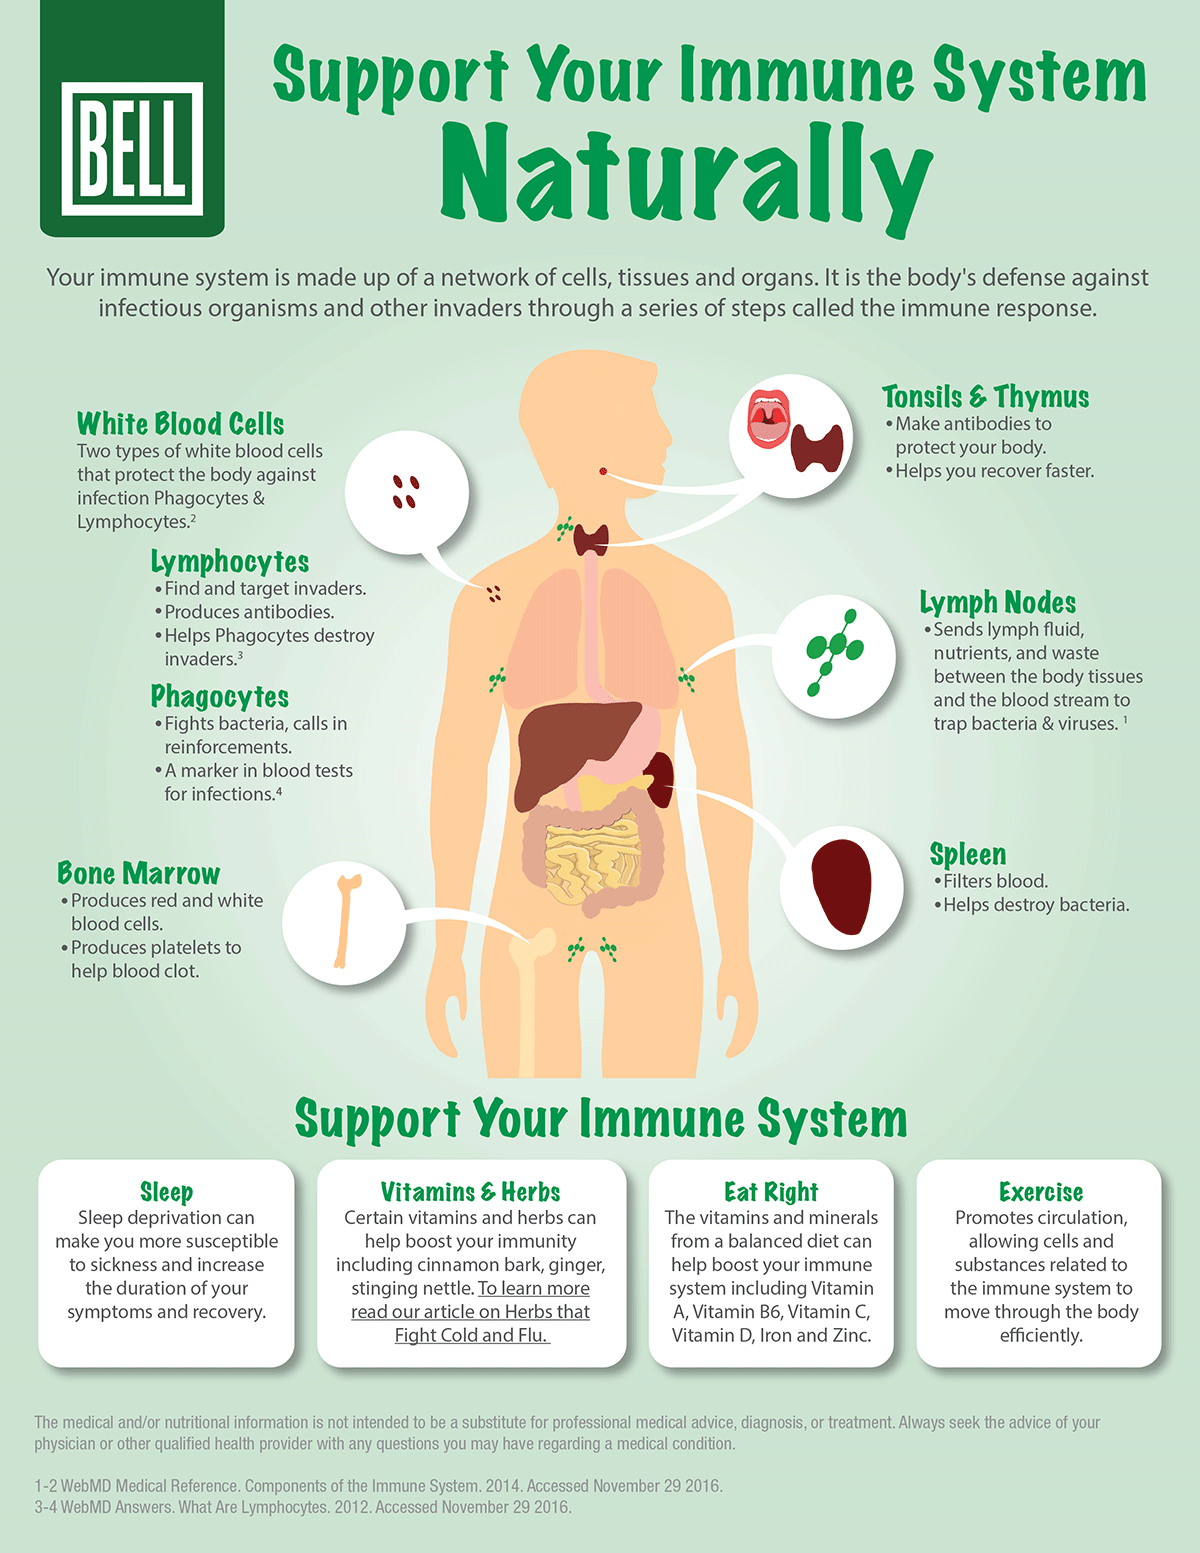 Support Your Immune System Naturally Infographic